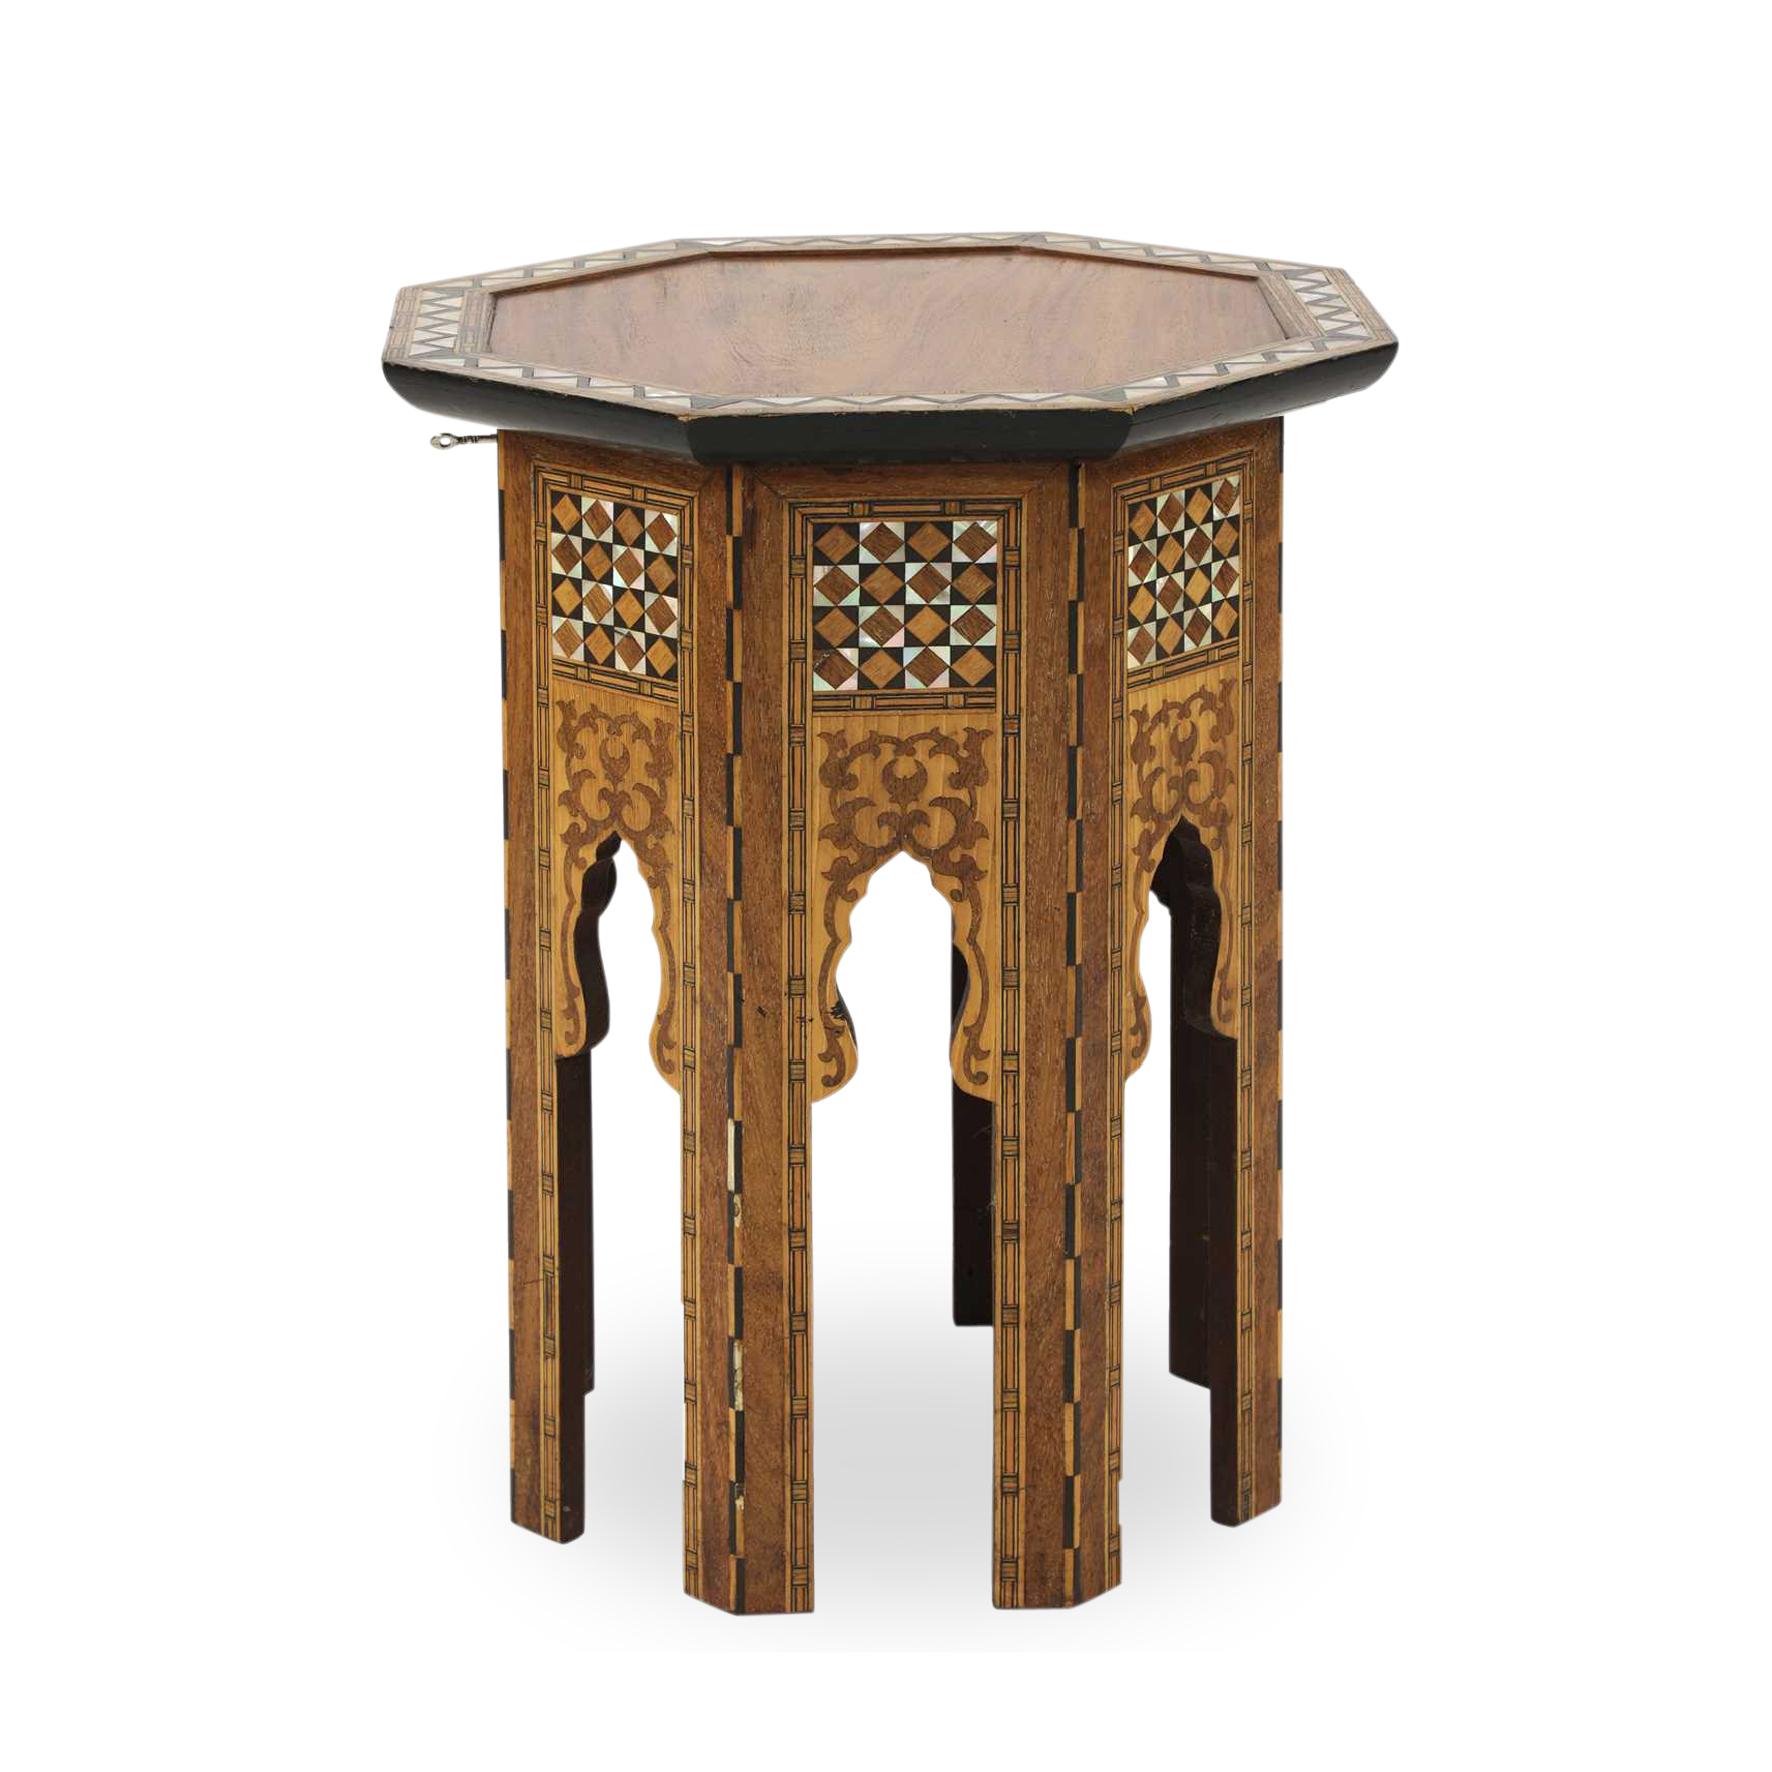 Fruitwood Syrian Octagonal Table, 19th Century For Sale